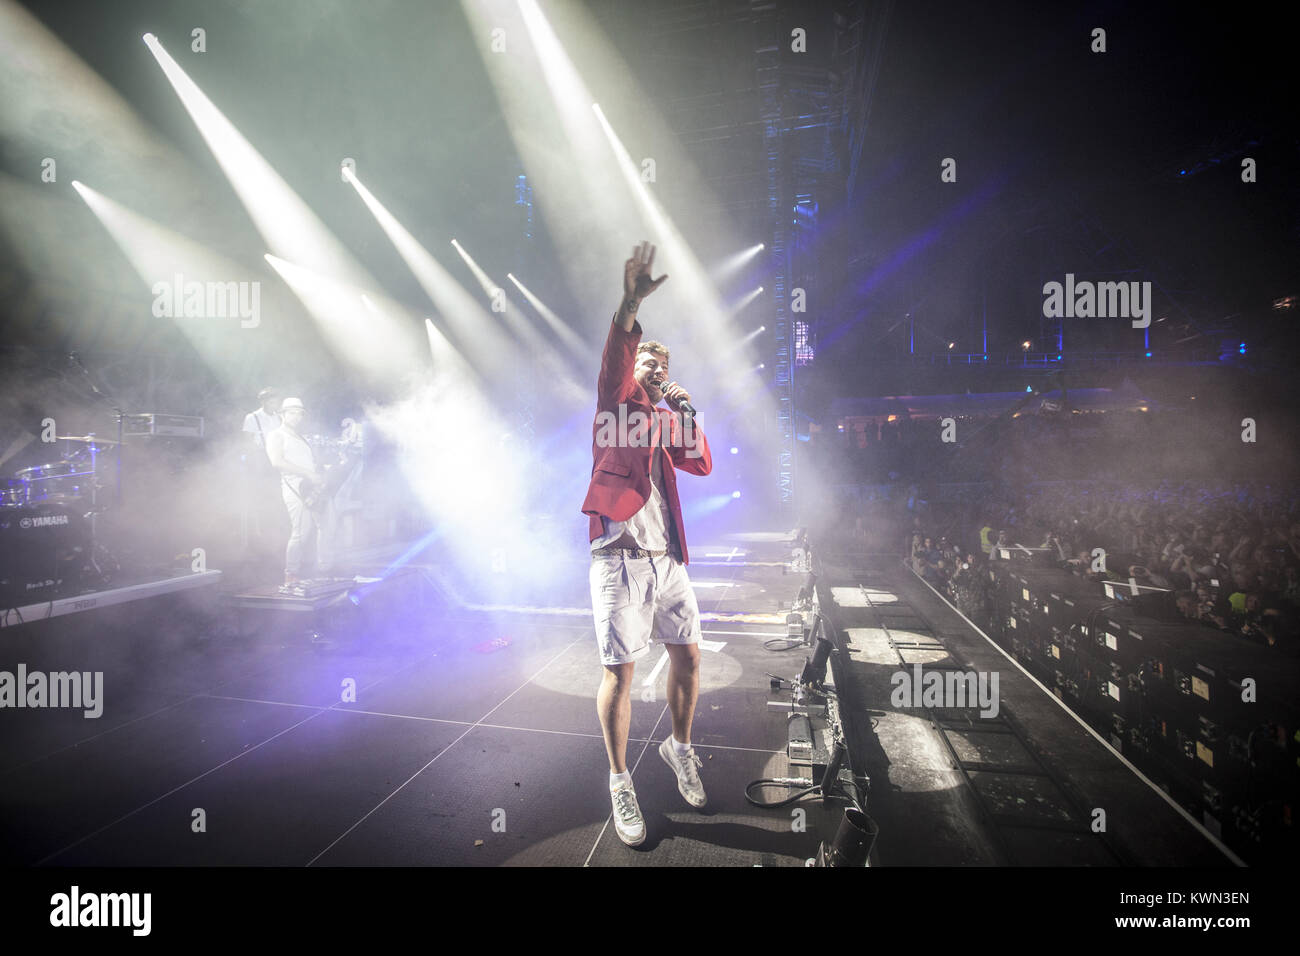 The popular German rapper Marten Laciny is best known by his stage name Marteria and here performs a live concert at the German hip-hop festival Splash! festival 2013. Germany, 13/07 2013. Stock Photo